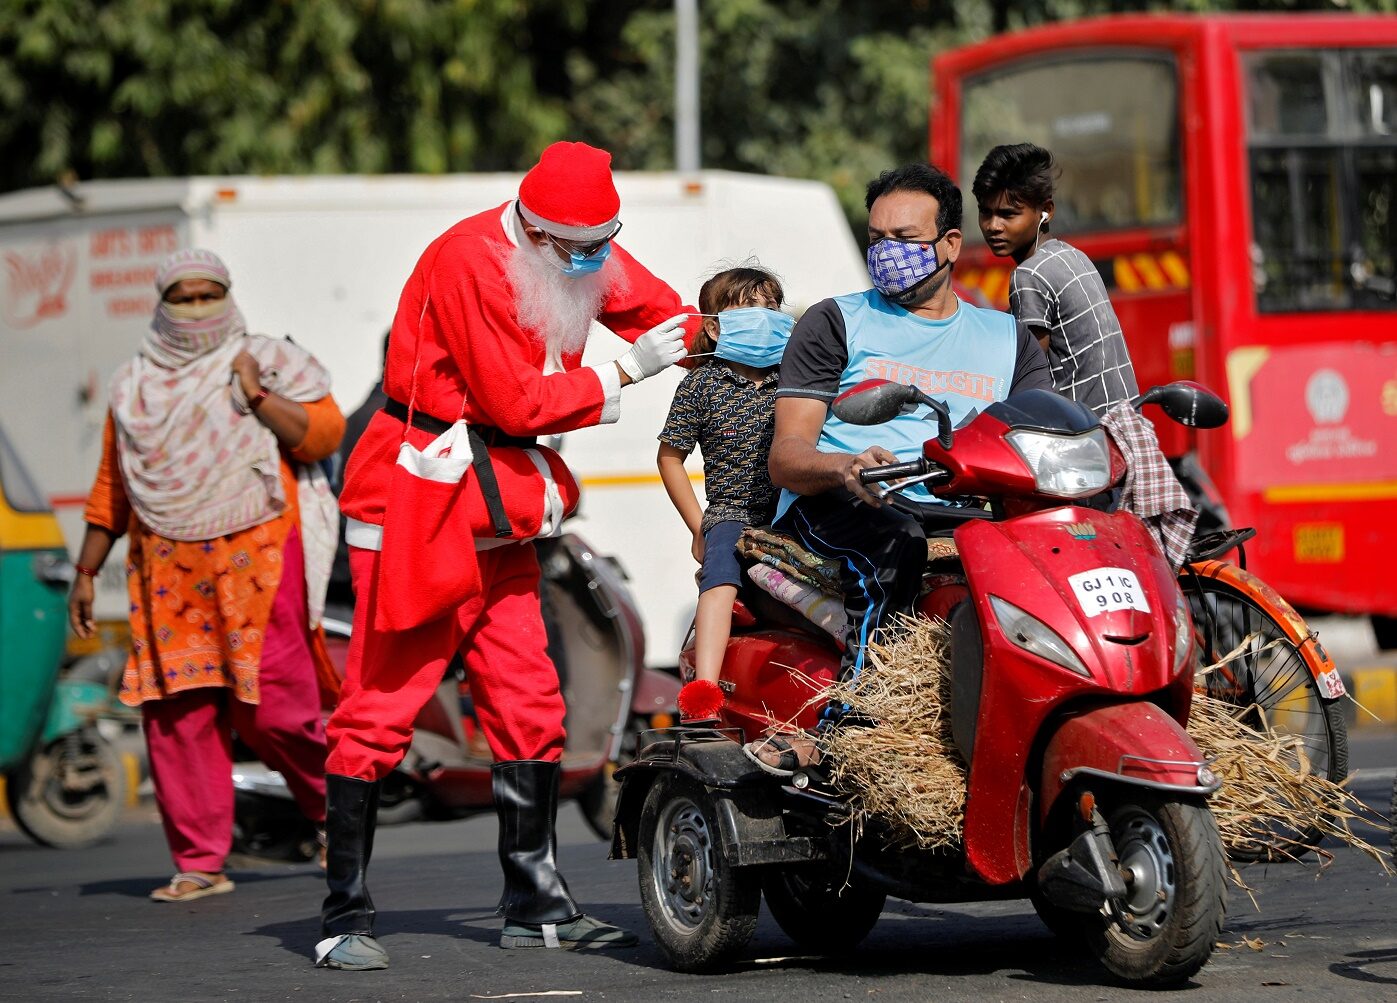 A man wearing a Santa Claus costume distributes free masks on an intersection, amidst the spread of the coronavirus disease (COVID-19), in Ahmedabad, India, December 18, 2020. REUTERS/Amit Dave